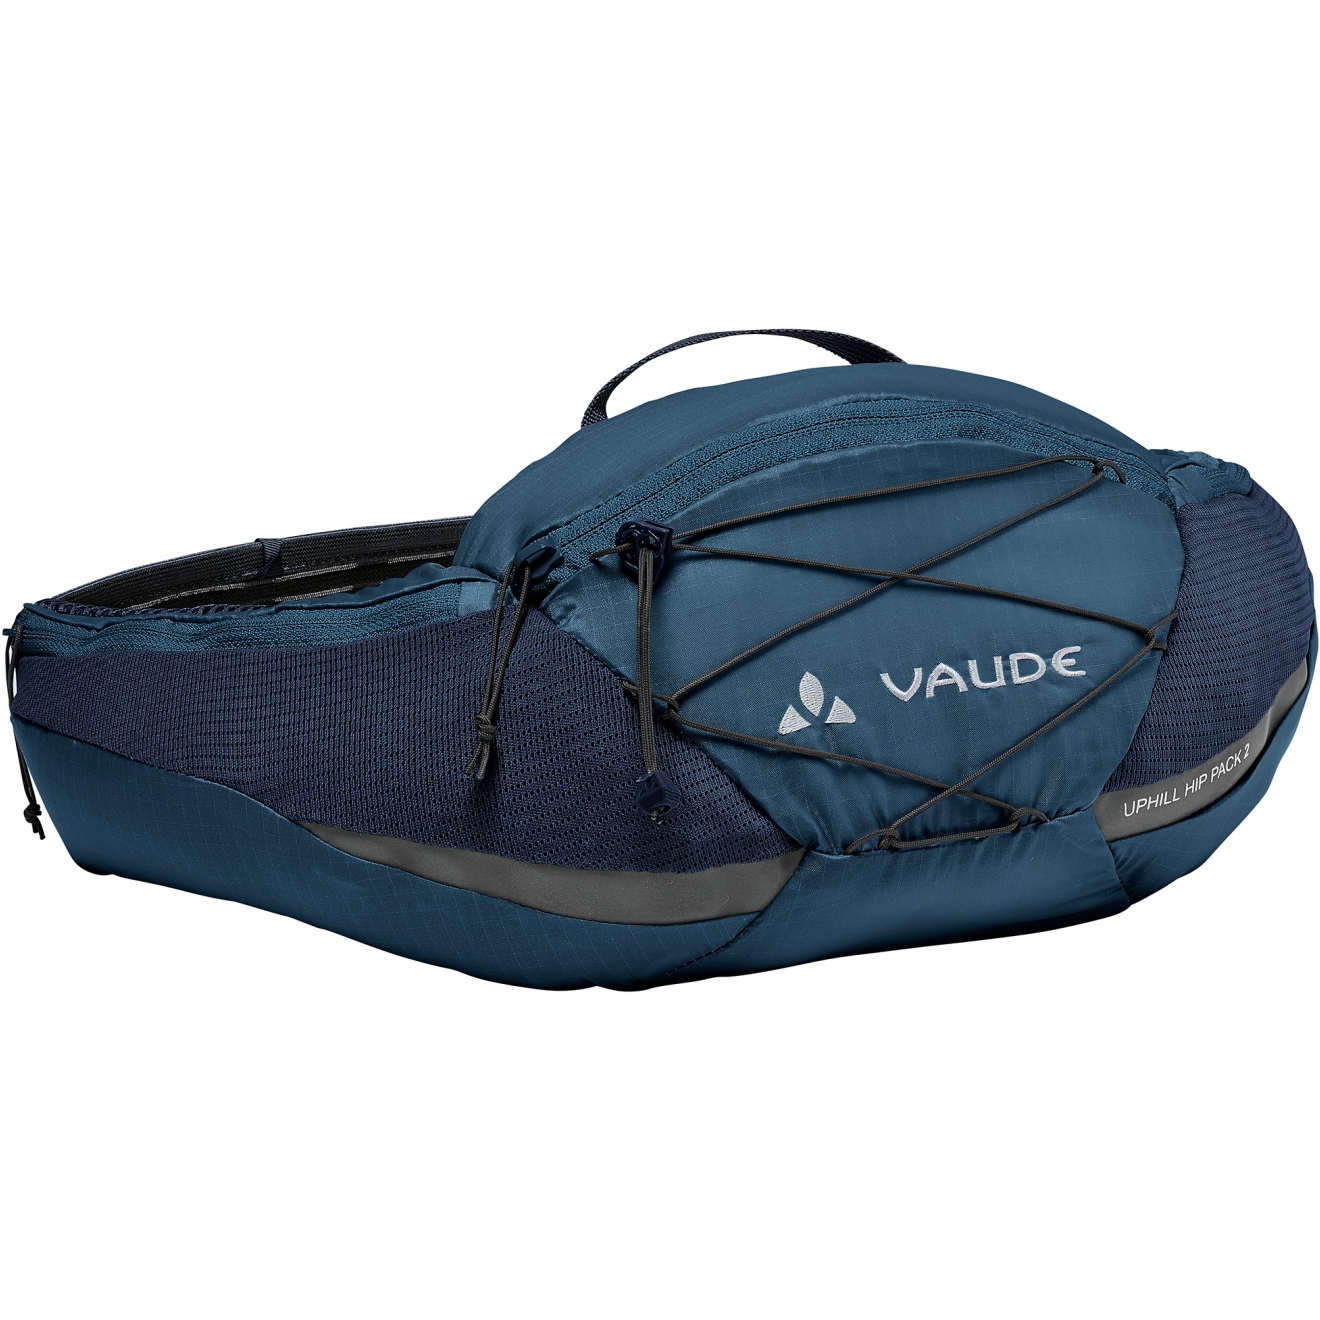 Picture of Vaude Uphill Hip Pack 2 - baltic sea